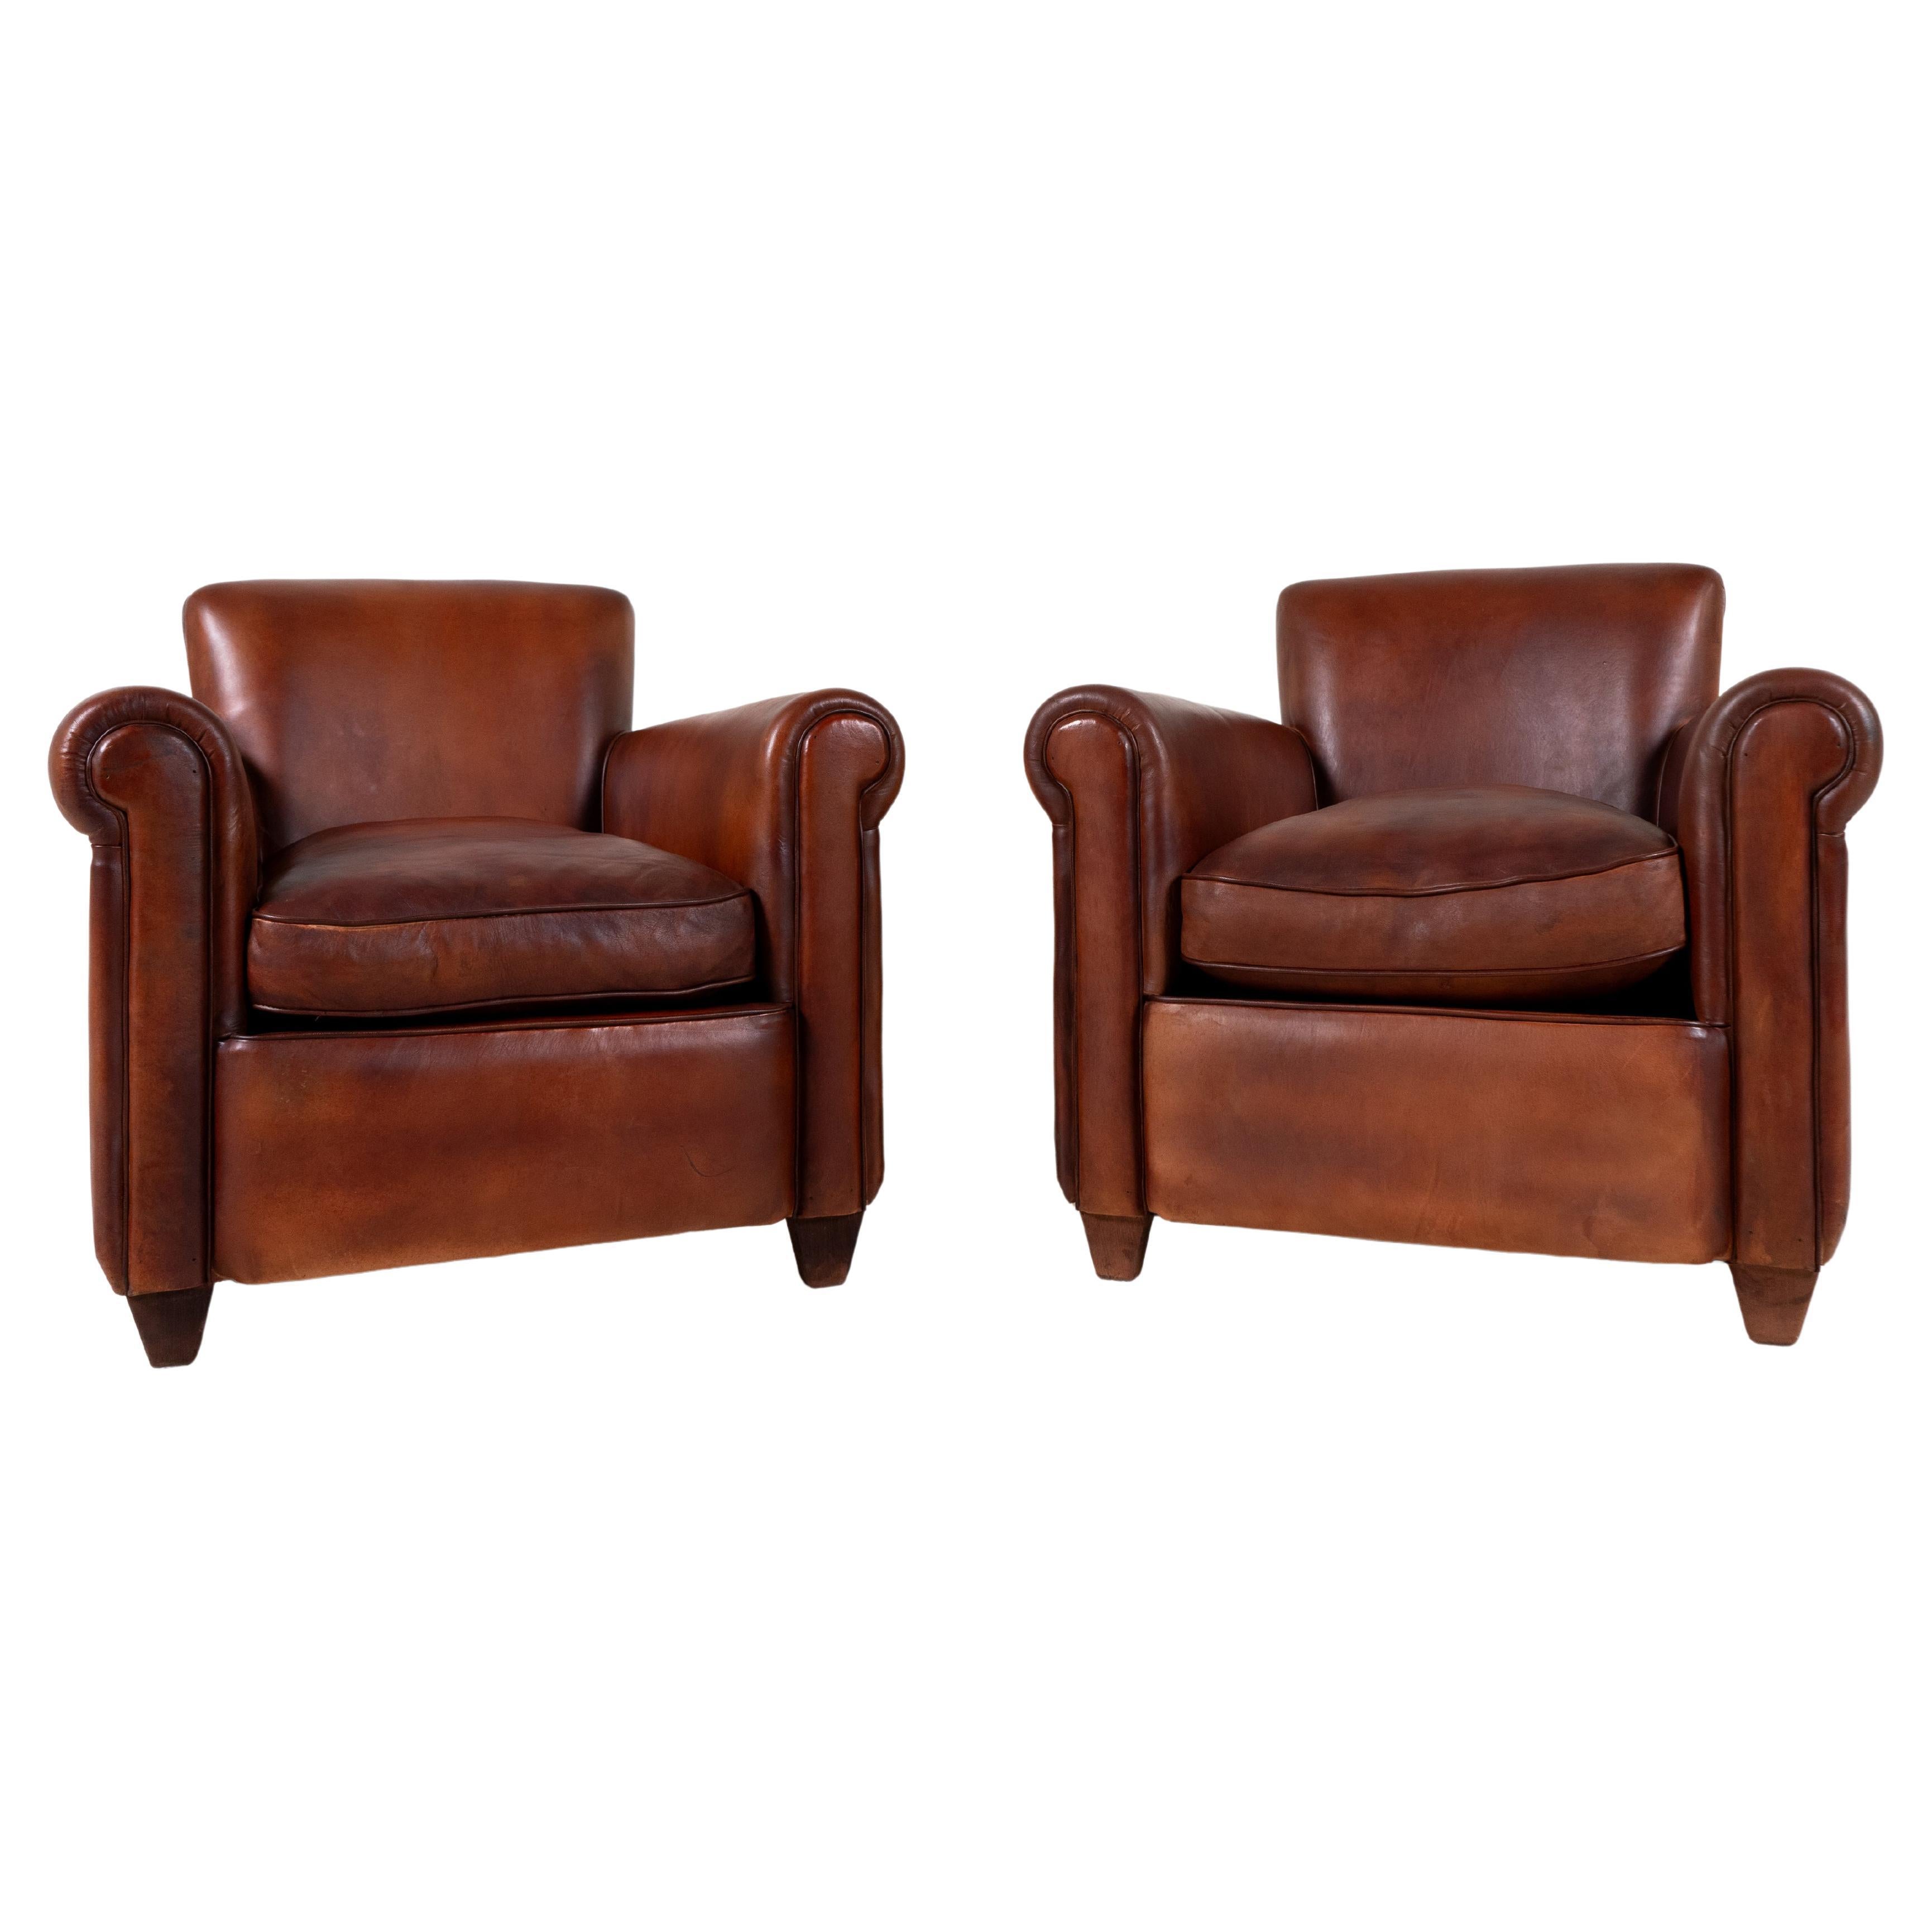 A Pair of "Submarine" French Leather Club Chairs 